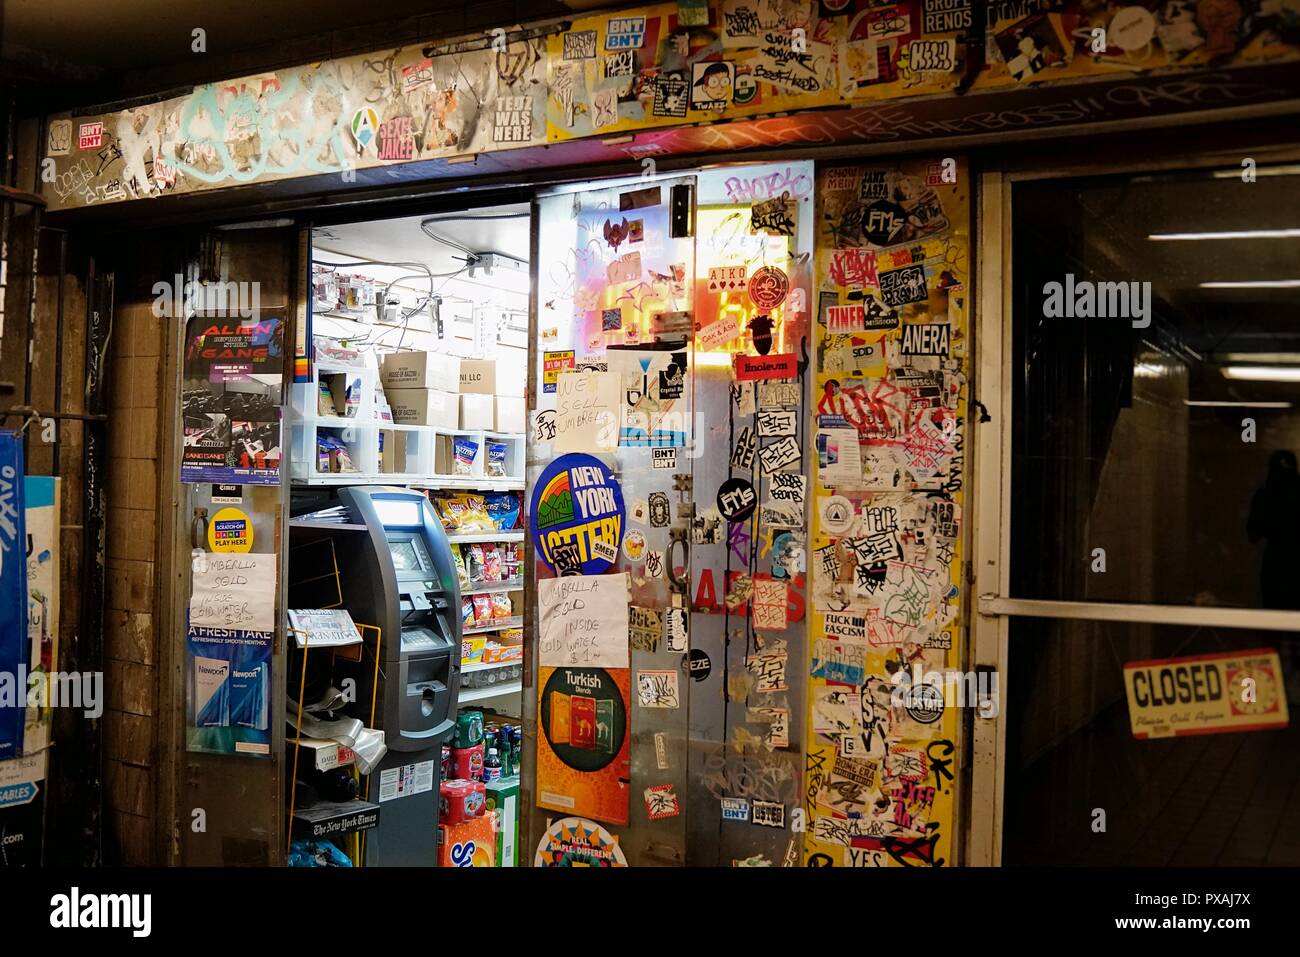 New York, NY; Aug 2018: The outside of an underground NYC bodega covered in stickers Stock Photo